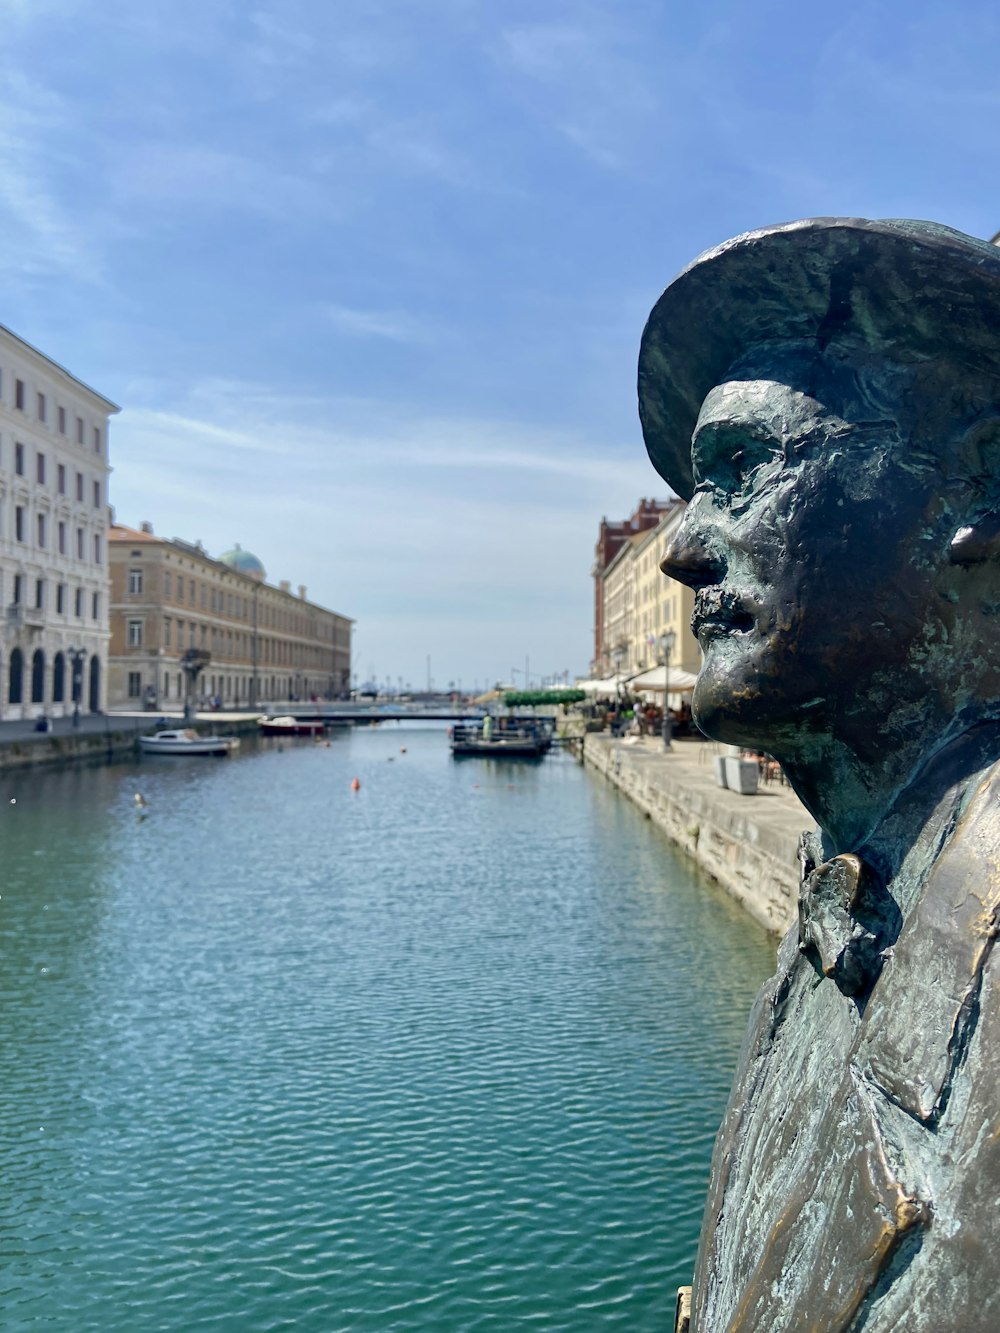 a statue of a person by a river with buildings and boats